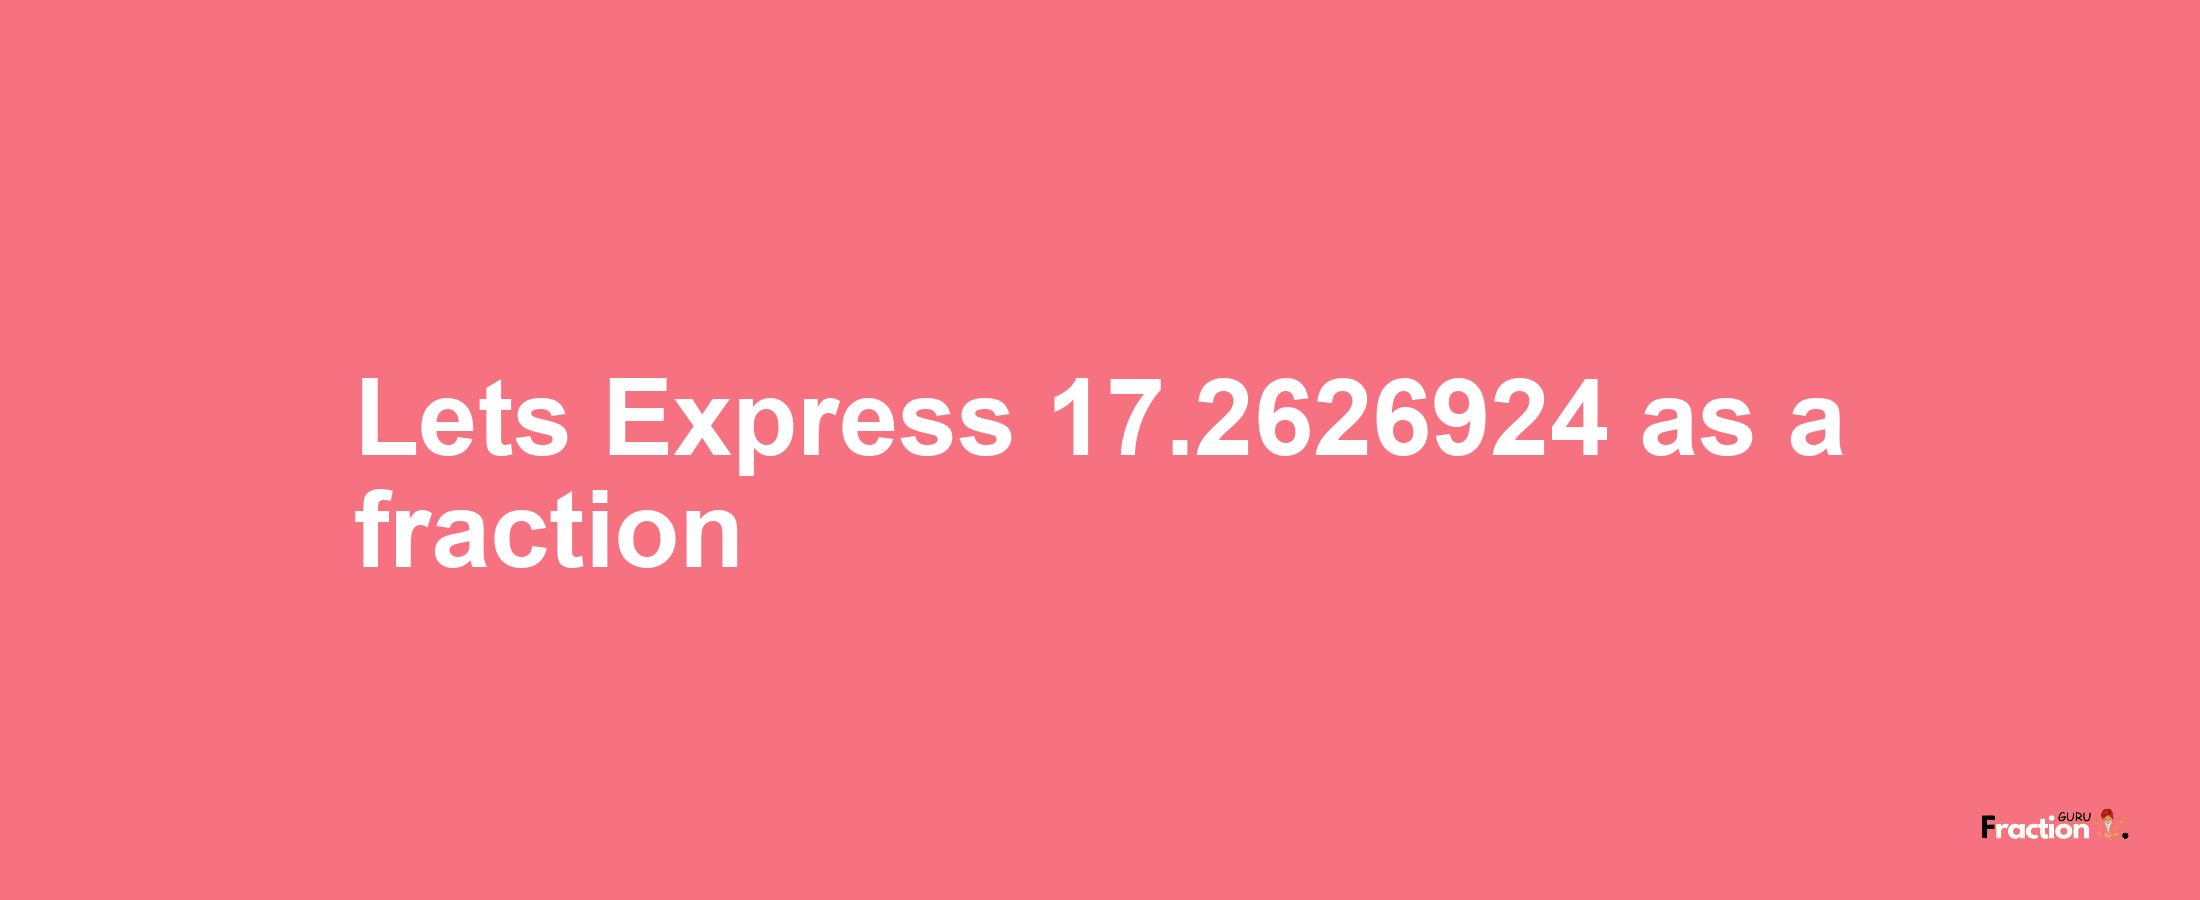 Lets Express 17.2626924 as afraction